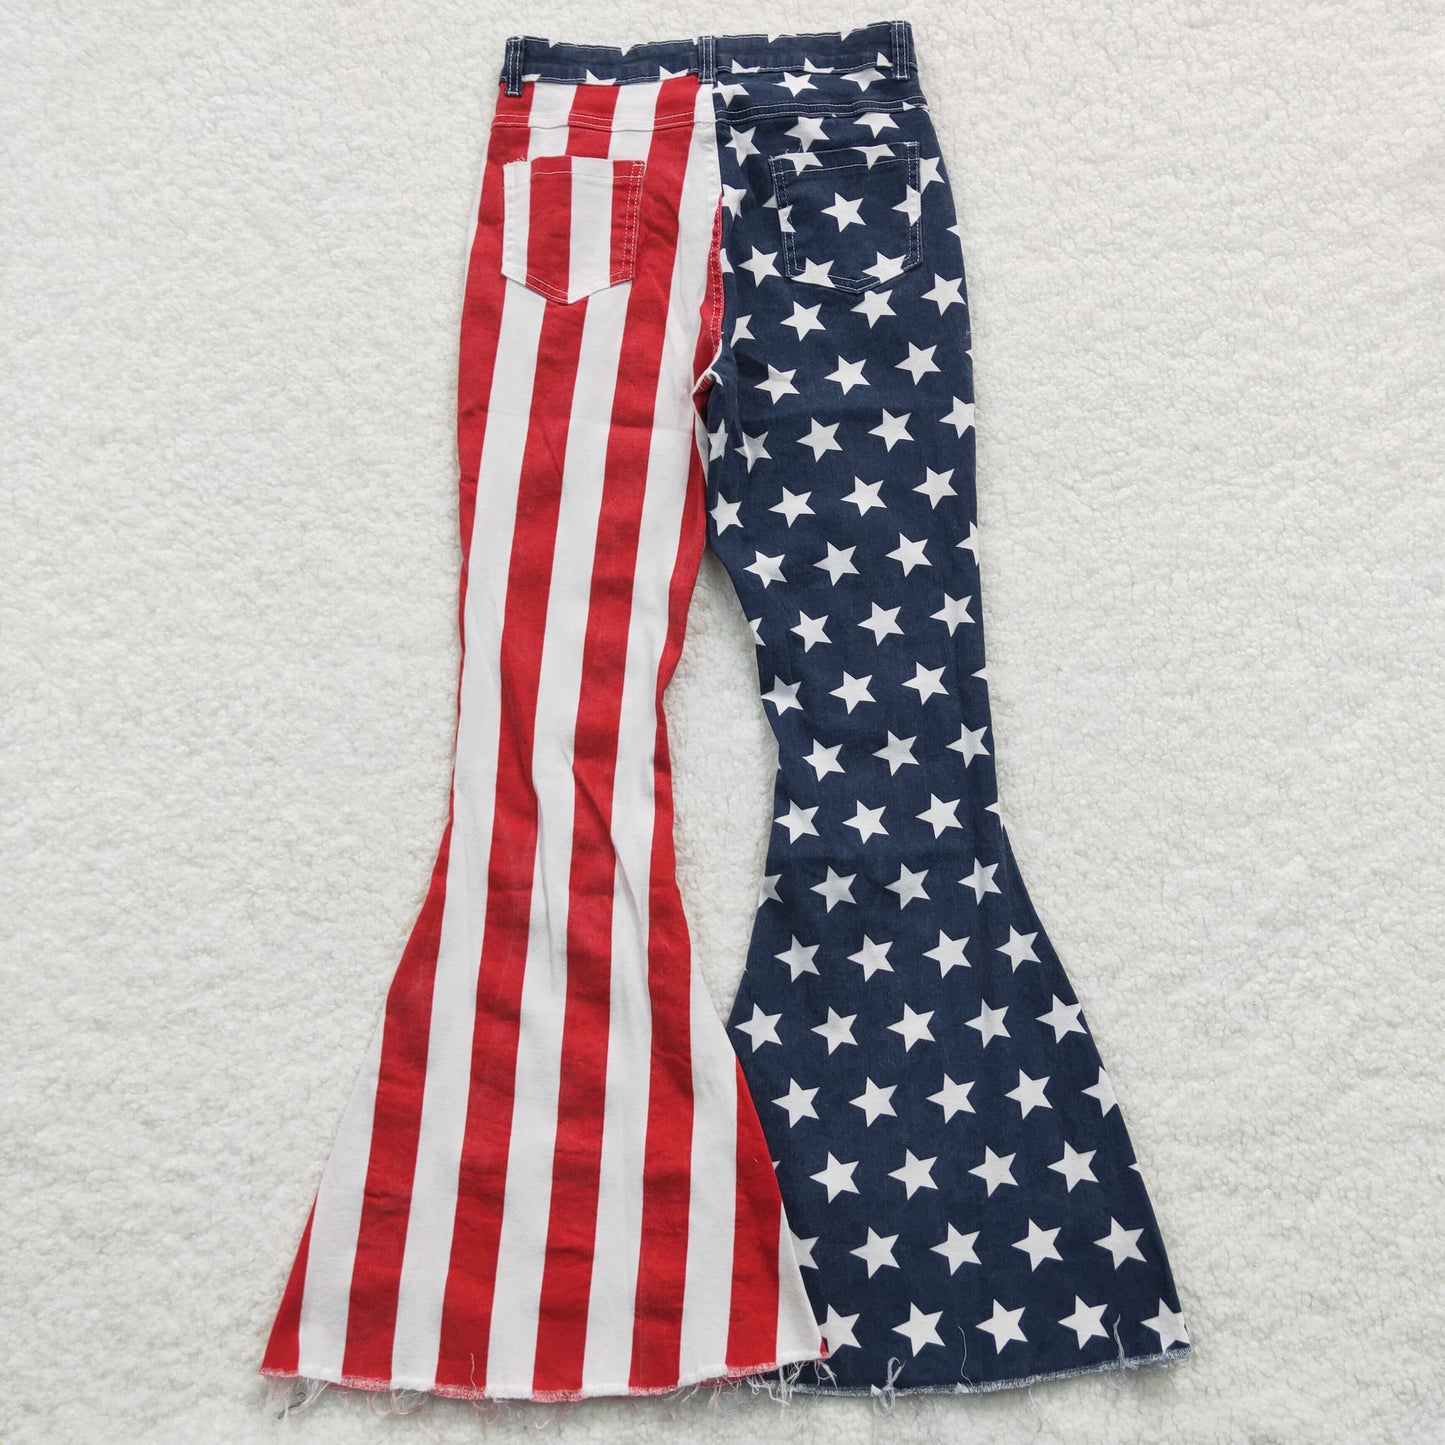 adult July 4th denim flare jeans